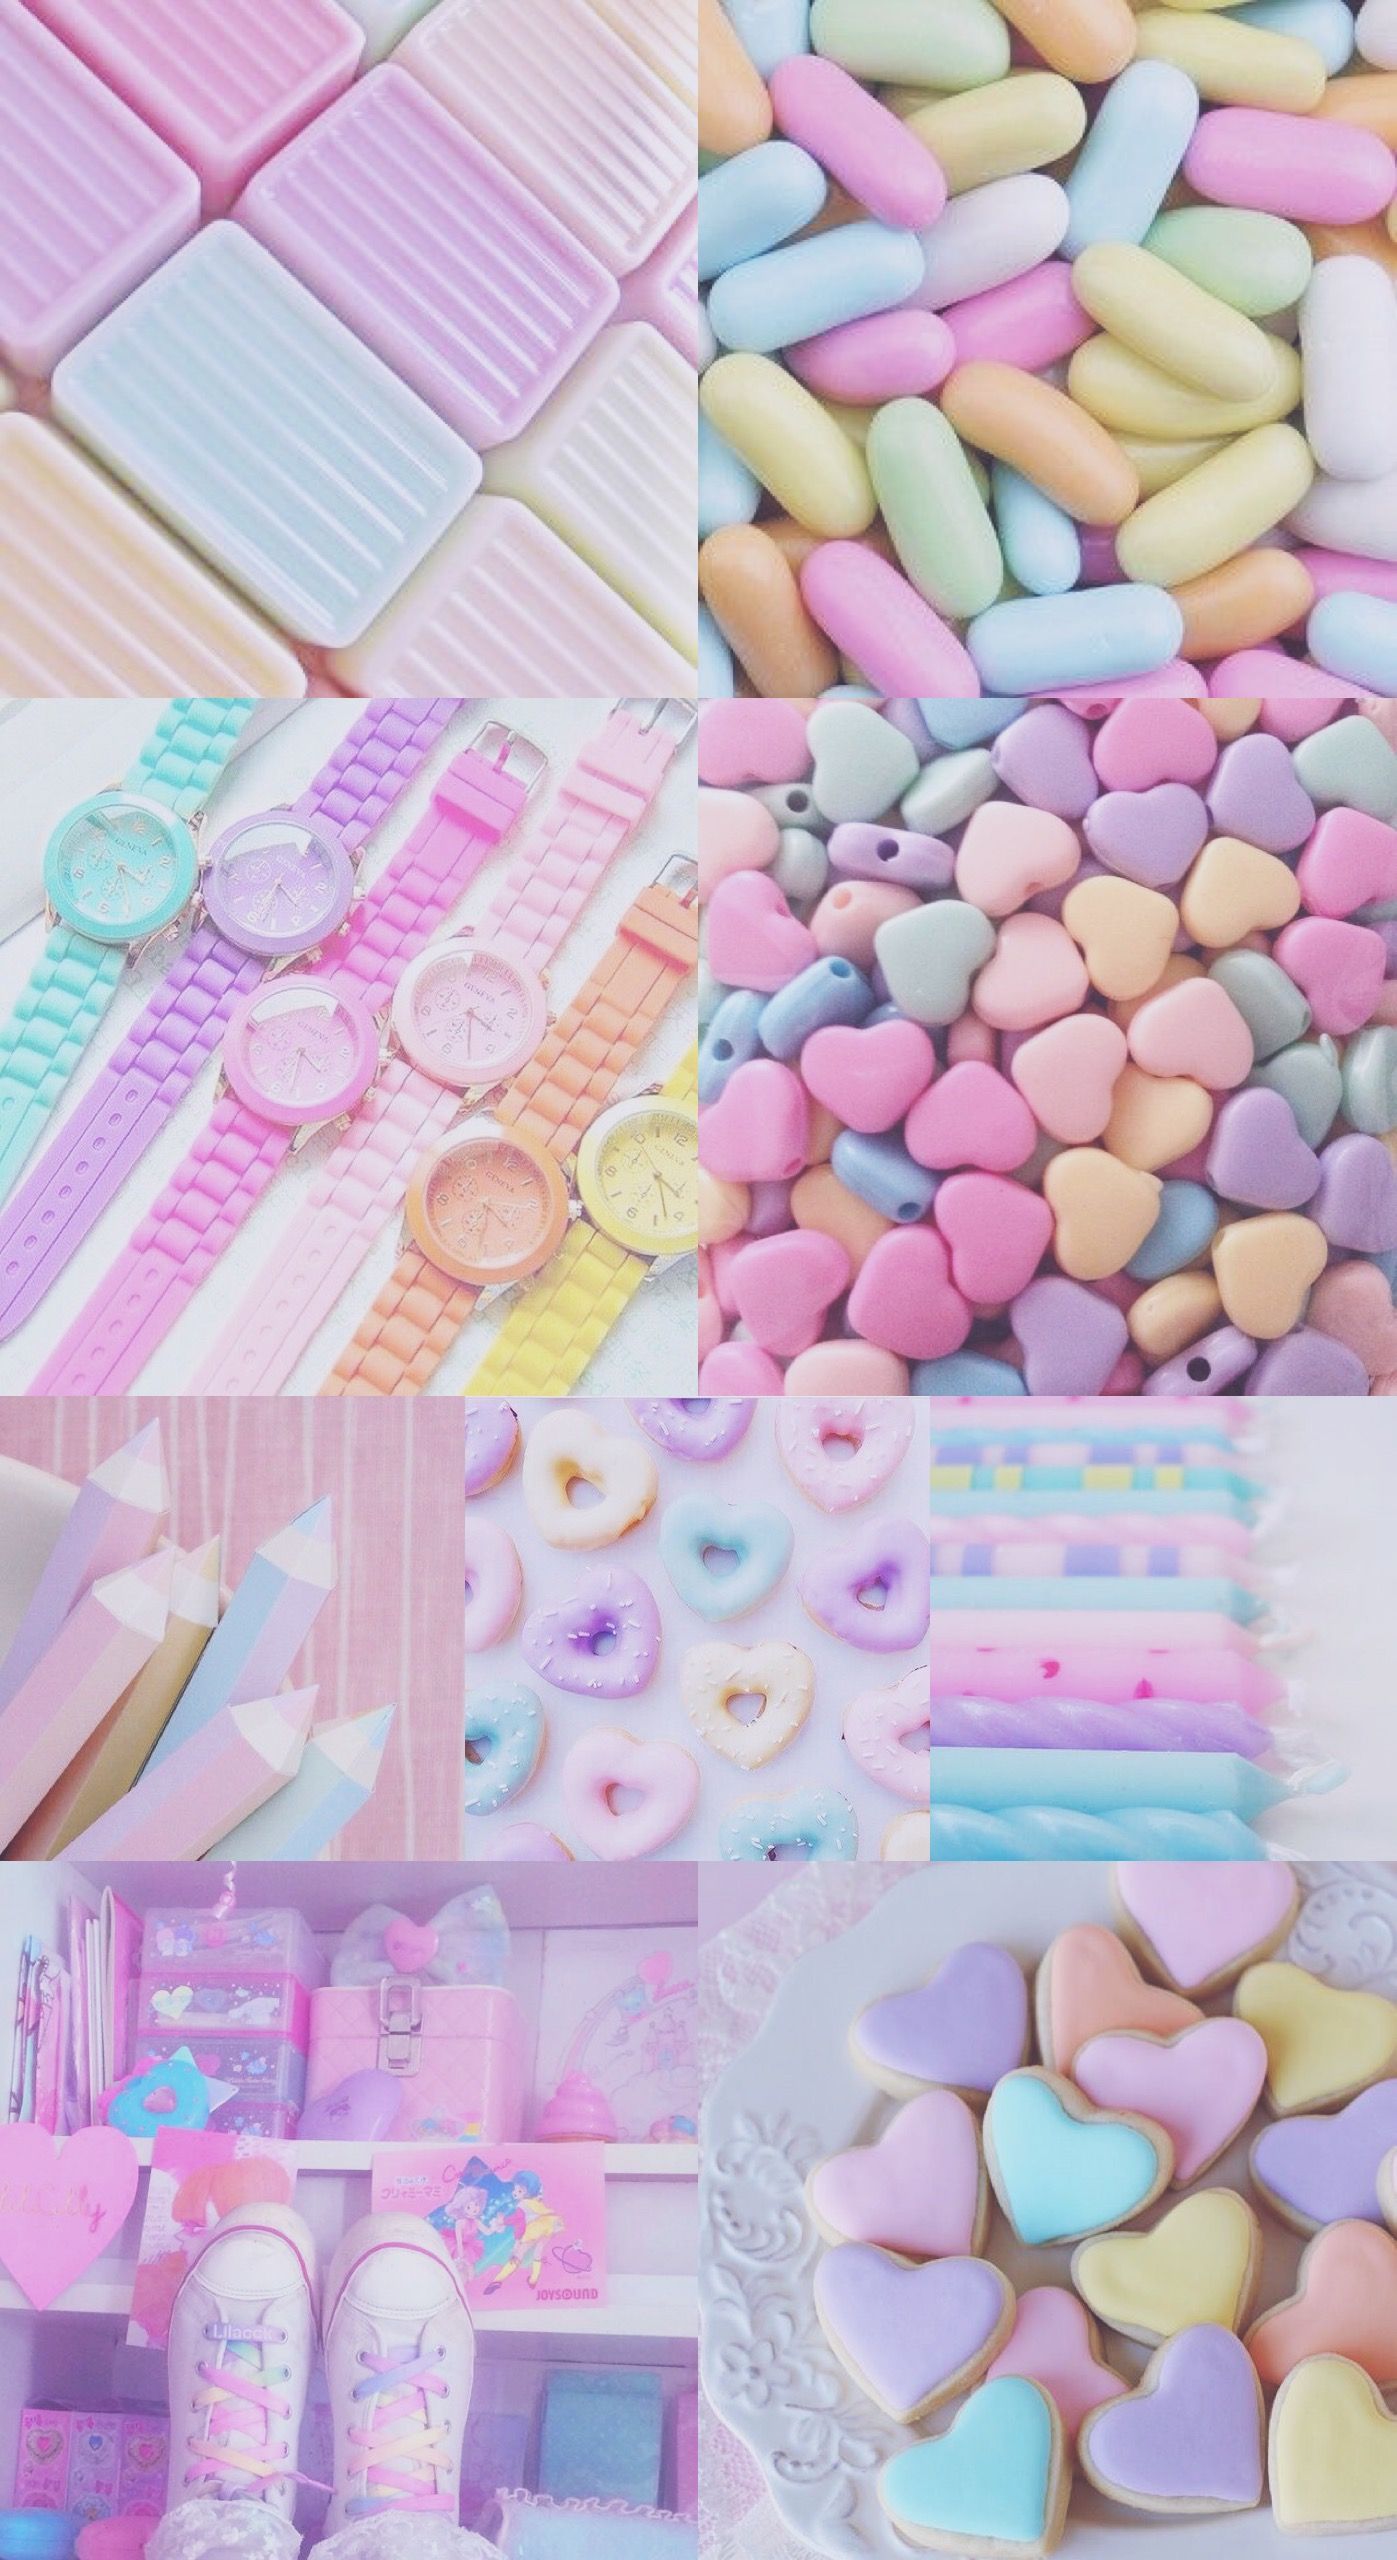 Pink and Blue Aesthetic Wallpaper Free Pink and Blue Aesthetic Background